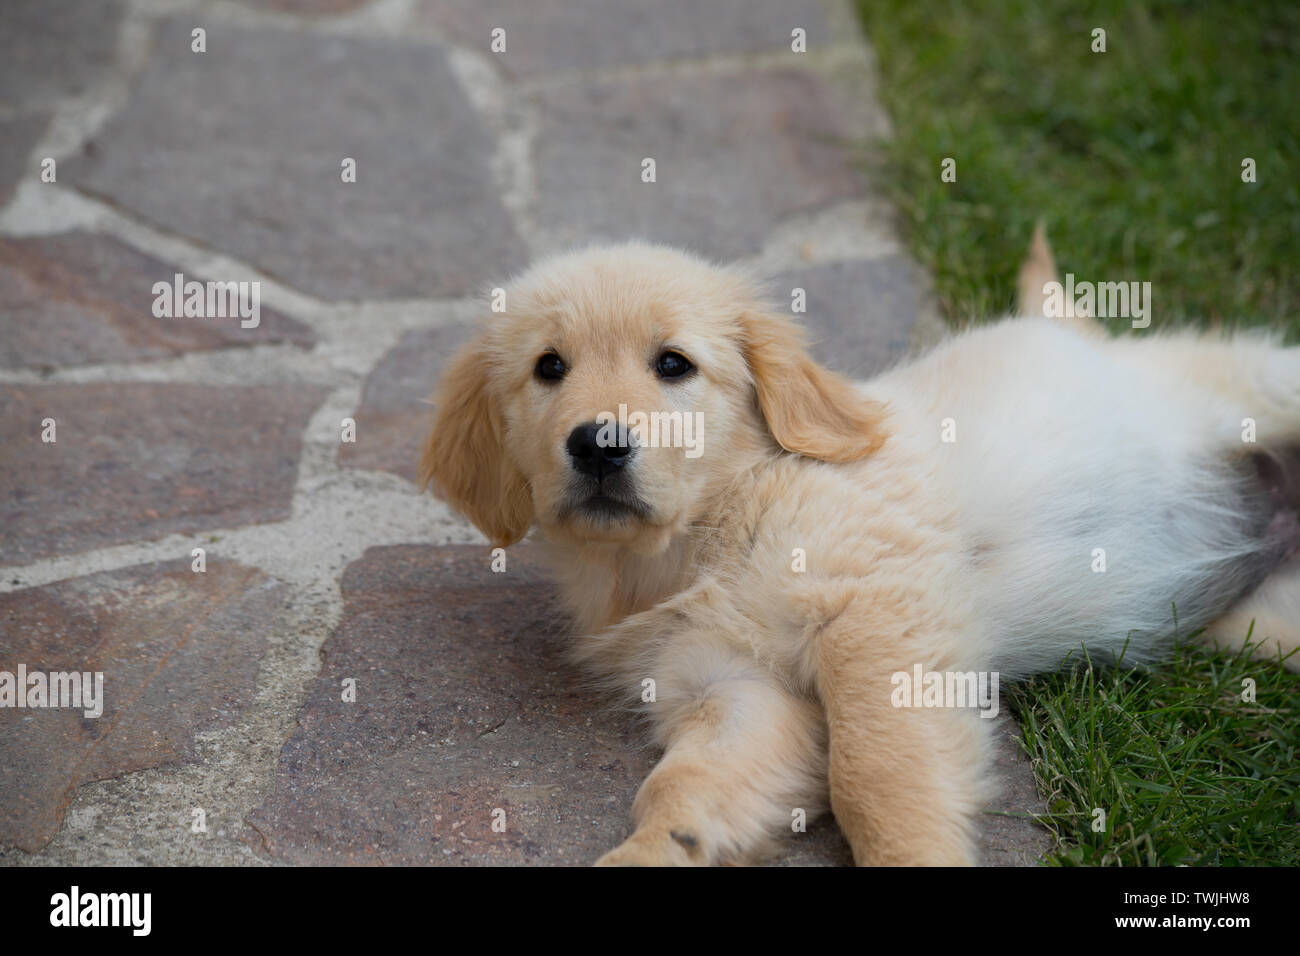 Puppy Dog Of The Golden Retriever Breed A Two Month Old Golden Retriever Dog Stock Photo Alamy